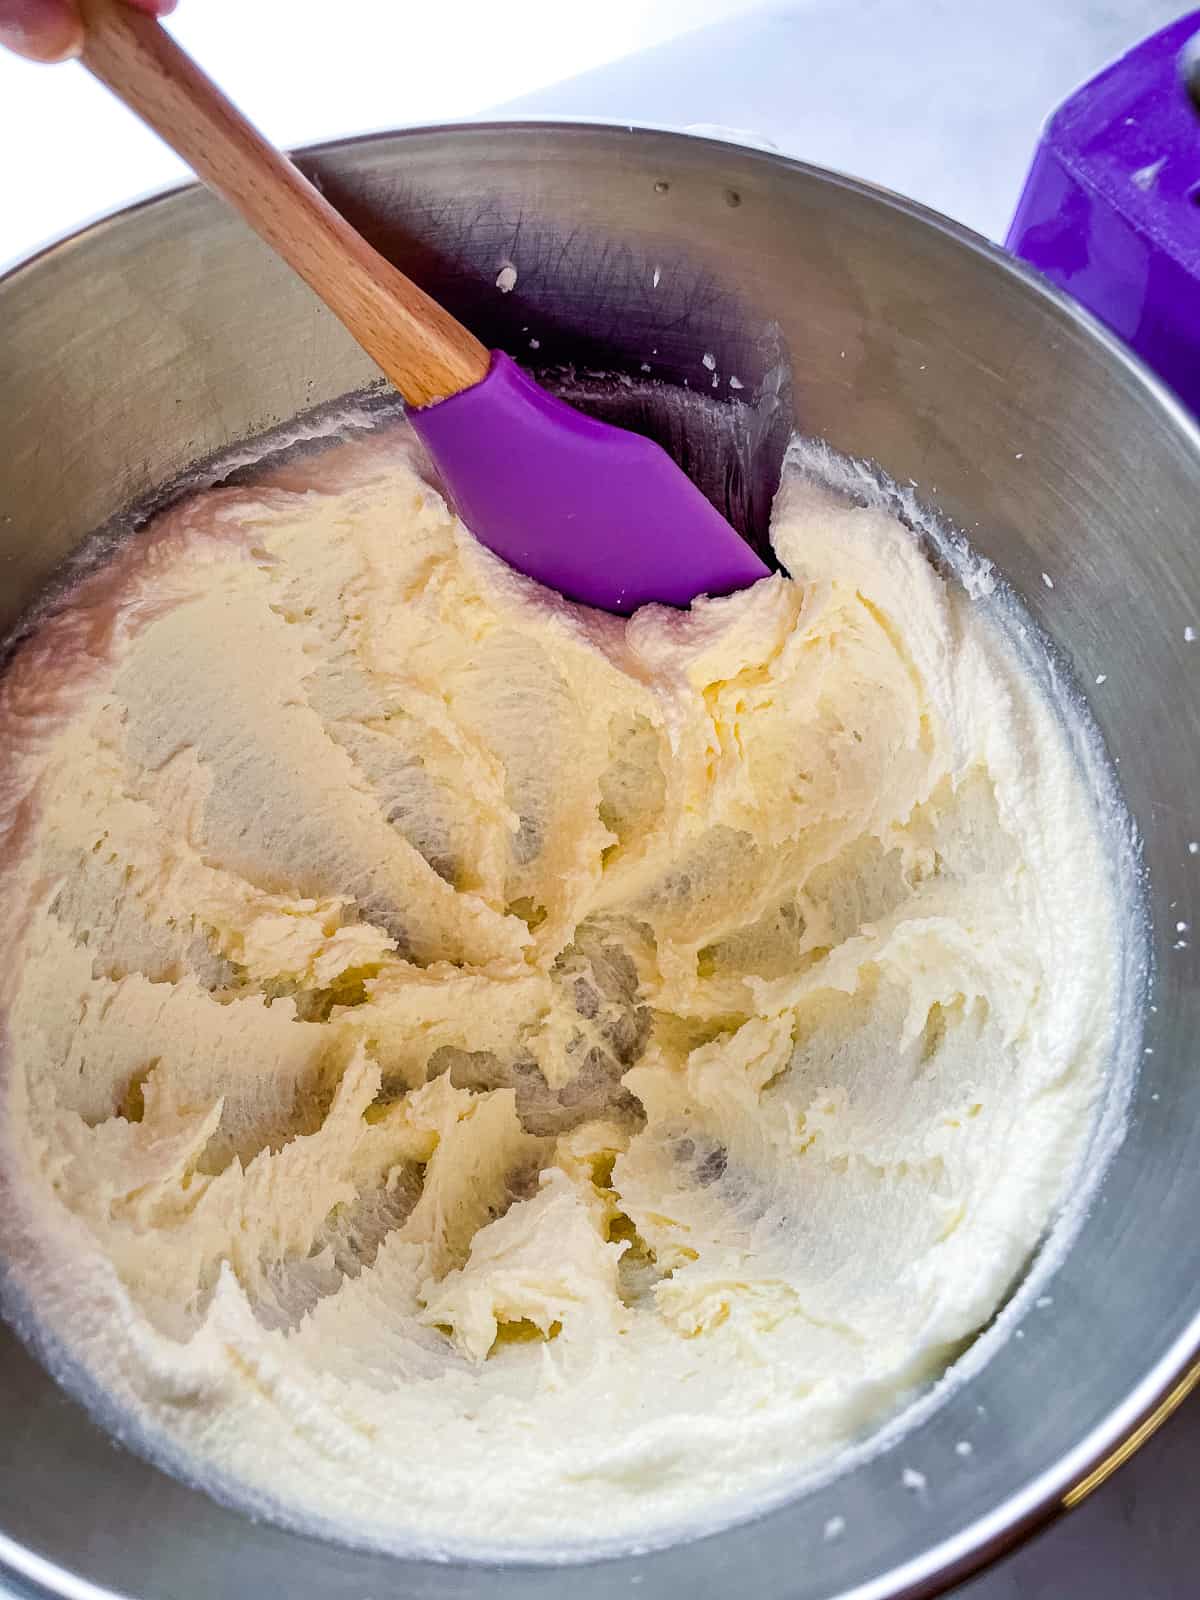 Scraping butter from the side of a mixing bowl for gluten-free pound cake.